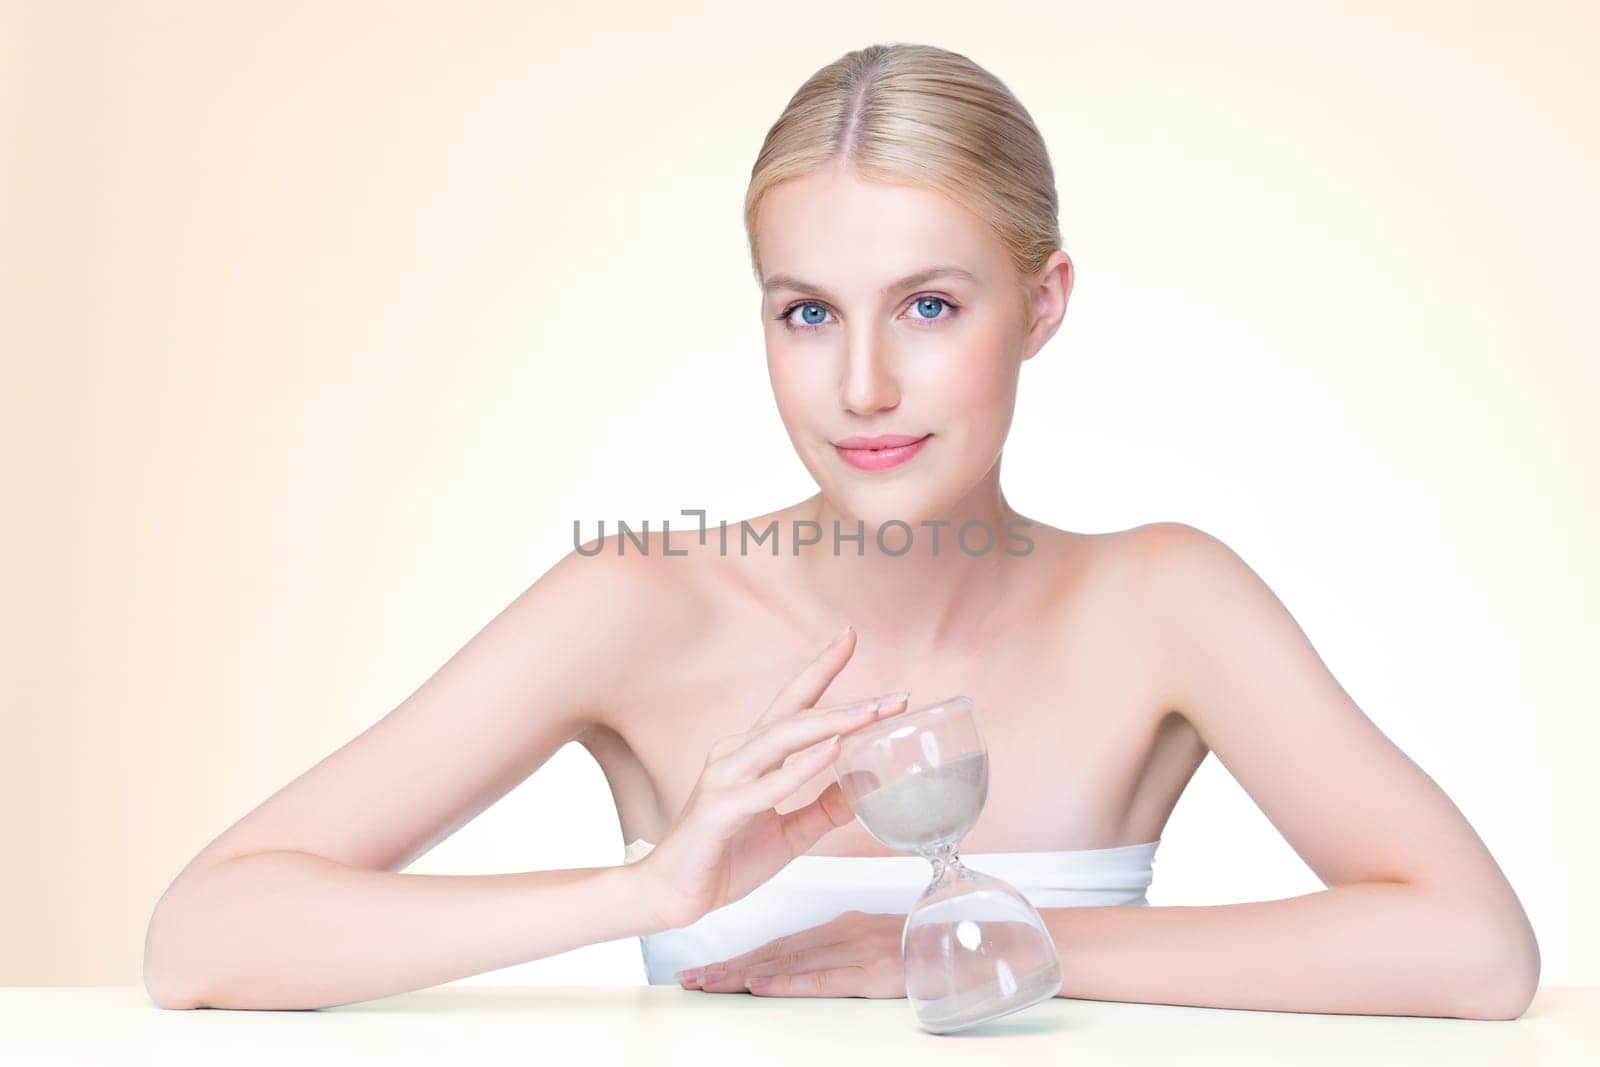 Personable beautiful woman with hourglass as anti-aging skincare concept by biancoblue